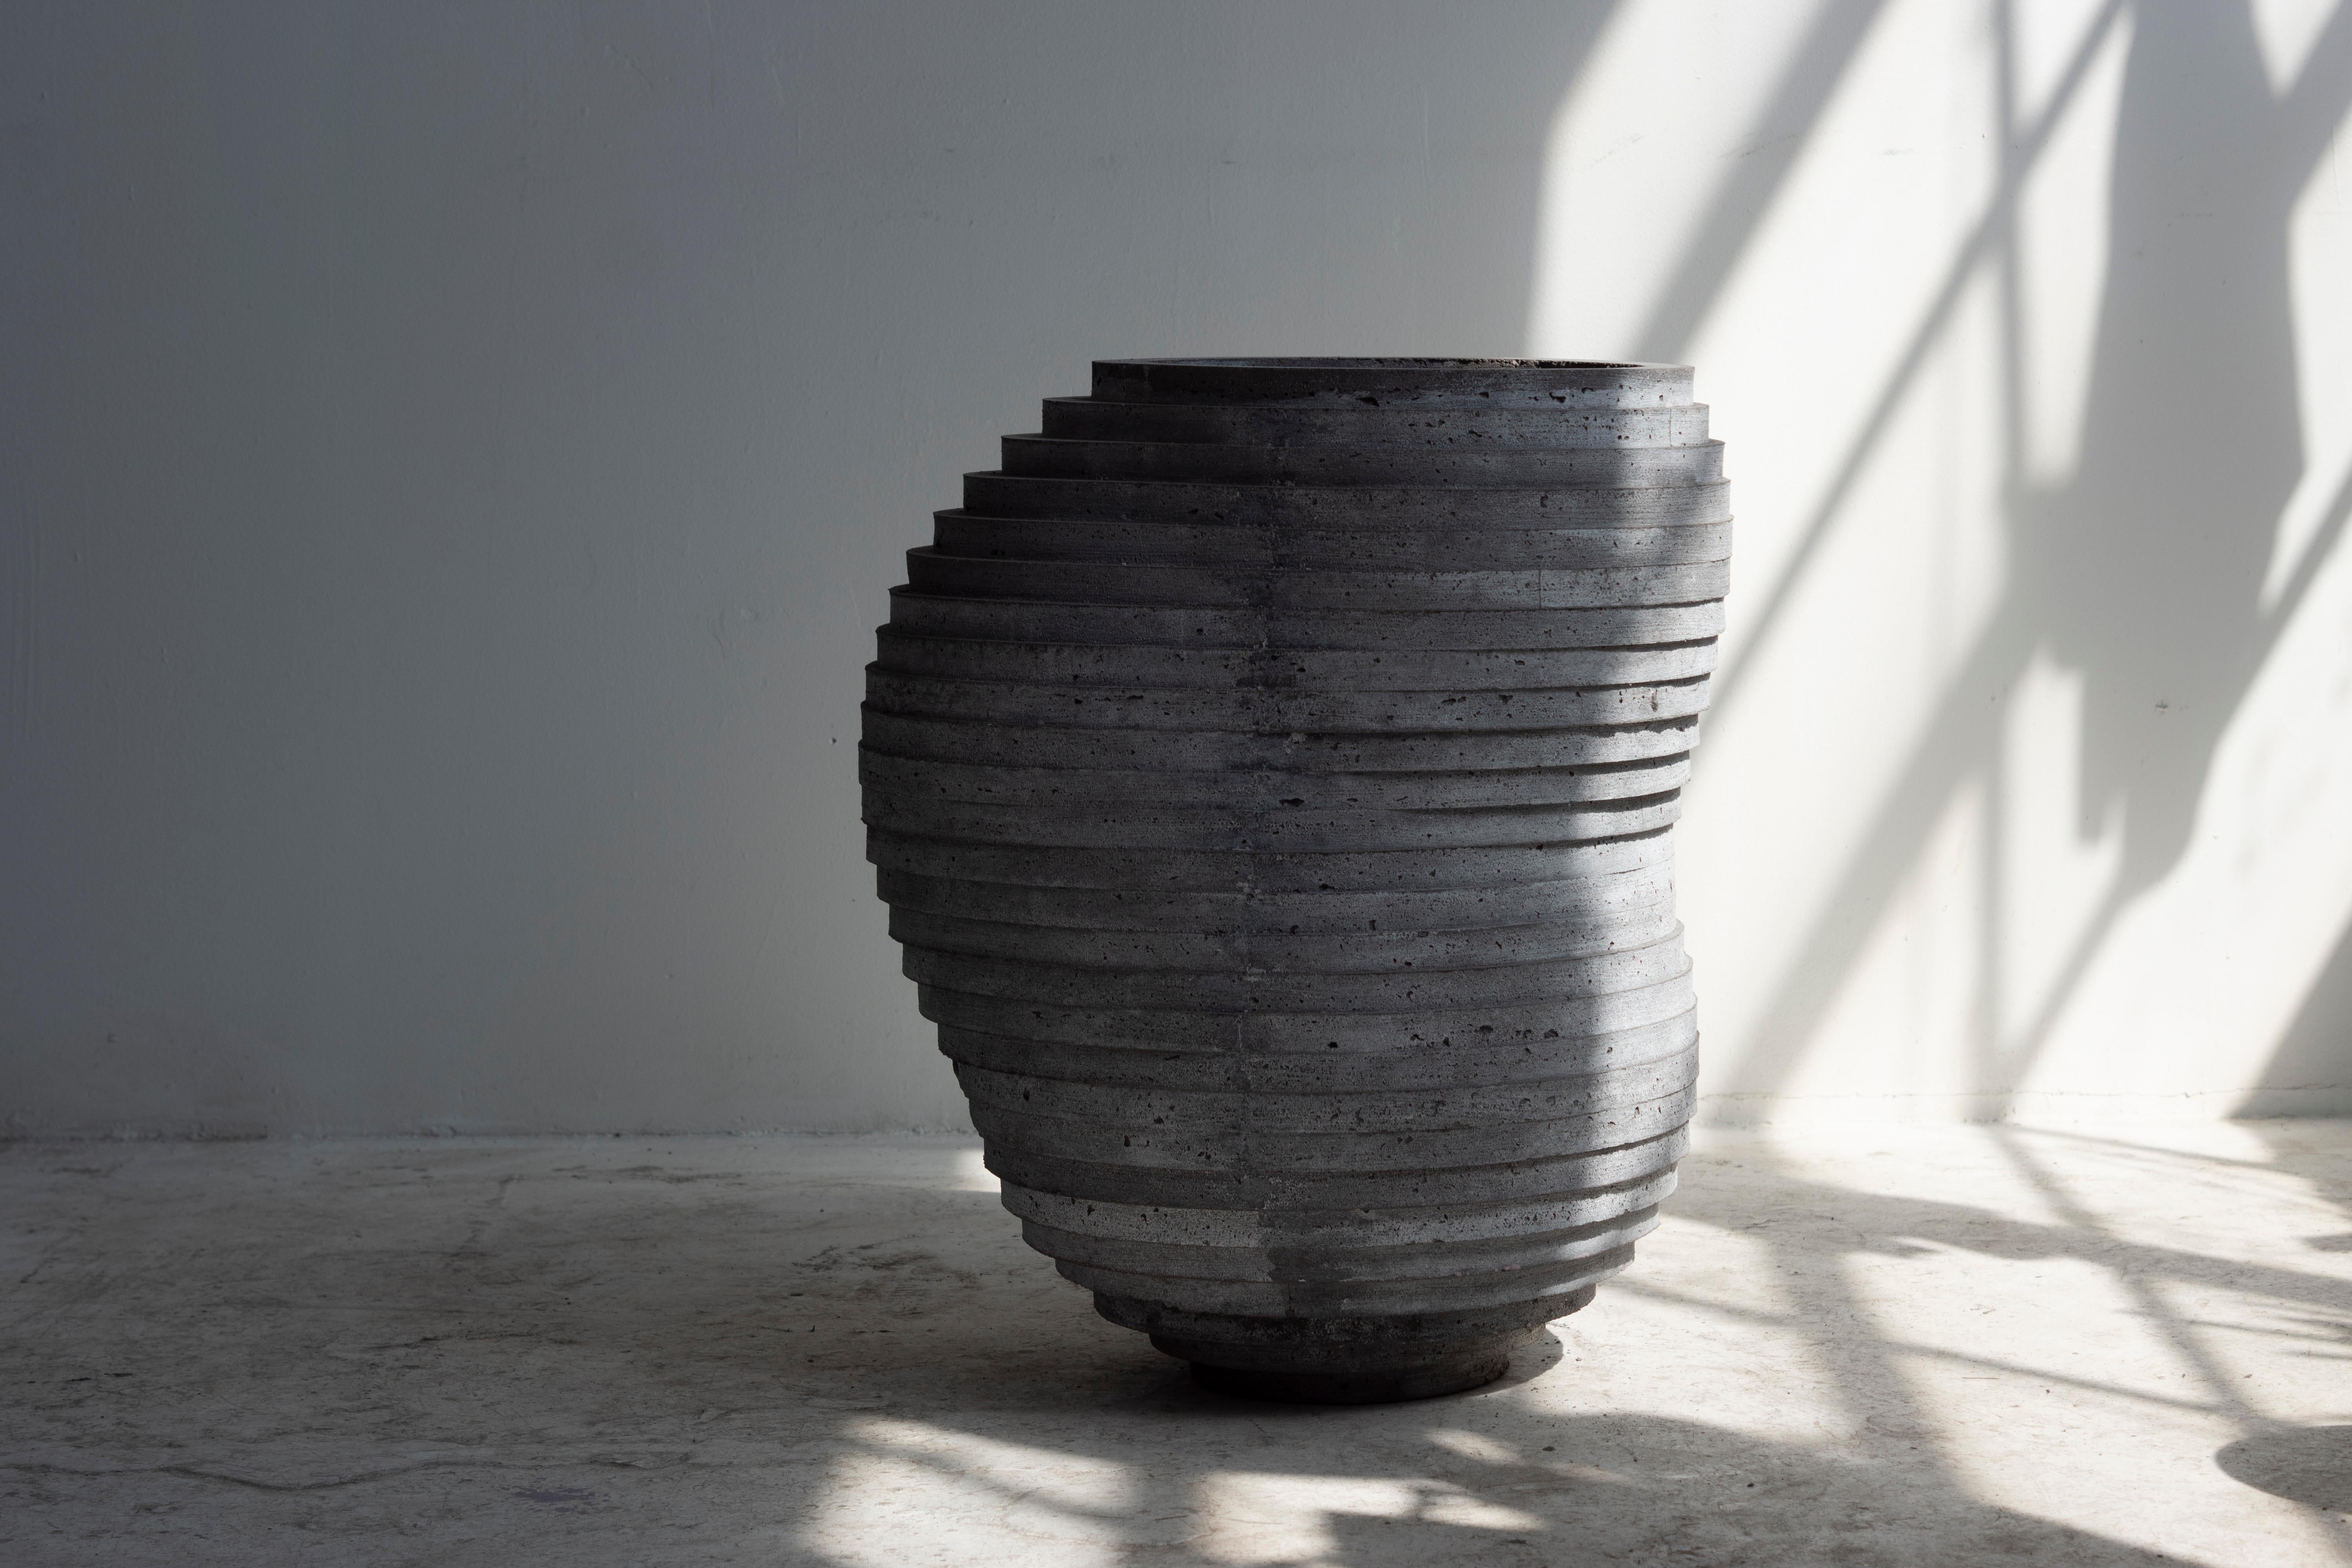 Large hand-cast vessel for indoor and outdoor use. Drainage holes can be added.

At the intersection of art, craft, and design, Concrete Poetics' debut collection of hand-cast cement sculptural furniture and accessories streamlines visually